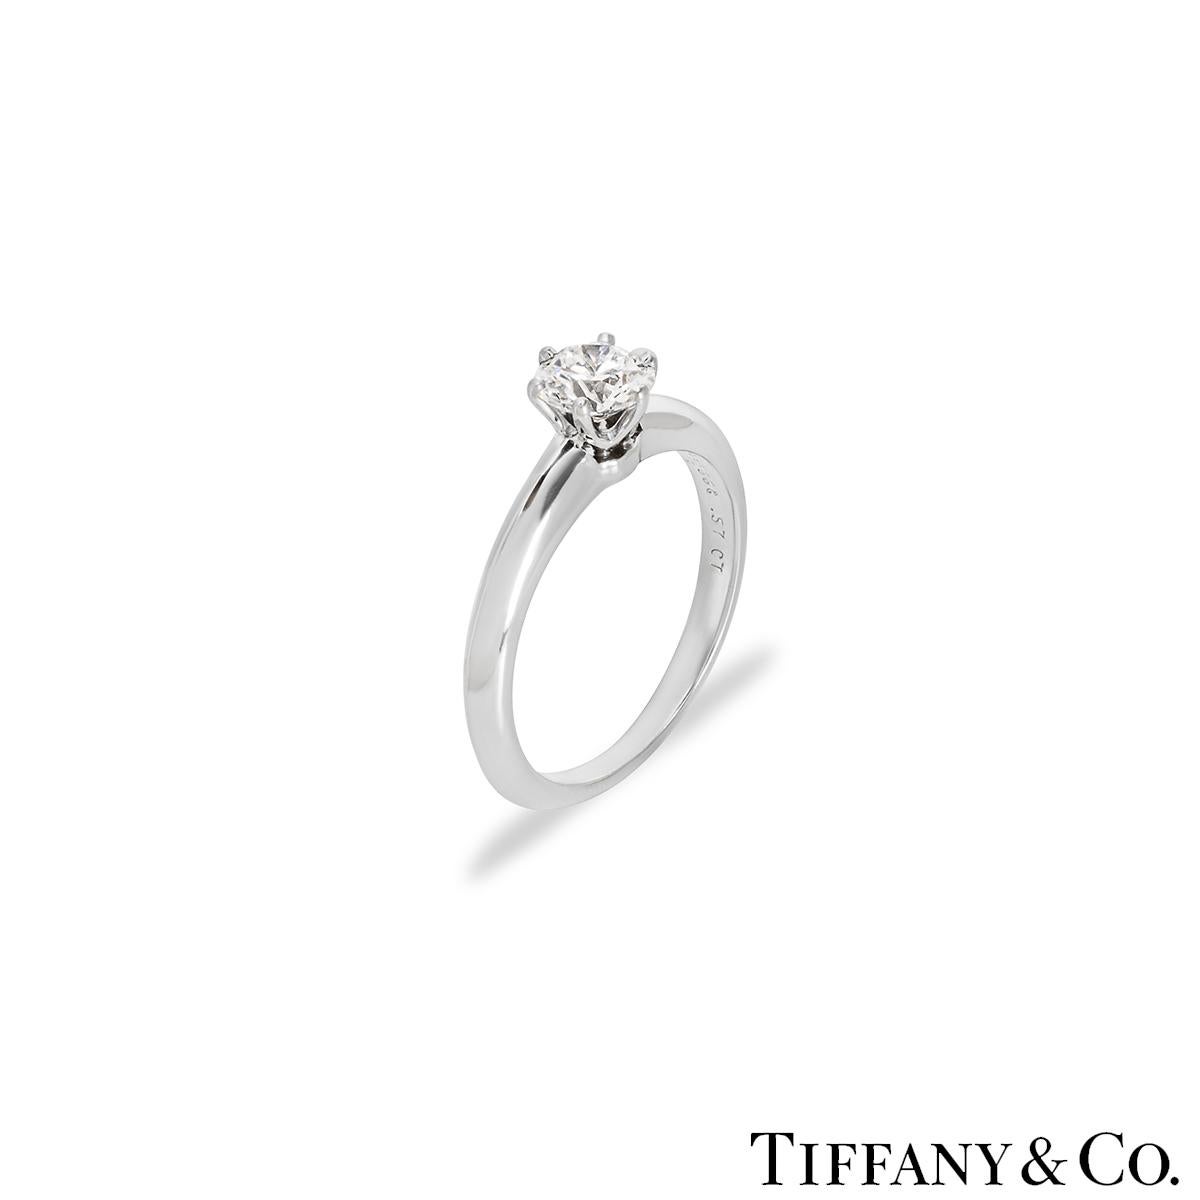 A stunning platinum diamond solitaire ring by Tiffany & Co. from the Setting collection. The solitaire features a round brilliant cut diamond set to the centre in a 6 claw mount weighing 0.57ct, D colour and VVS2 clarity. The 2mm knife edge ring has